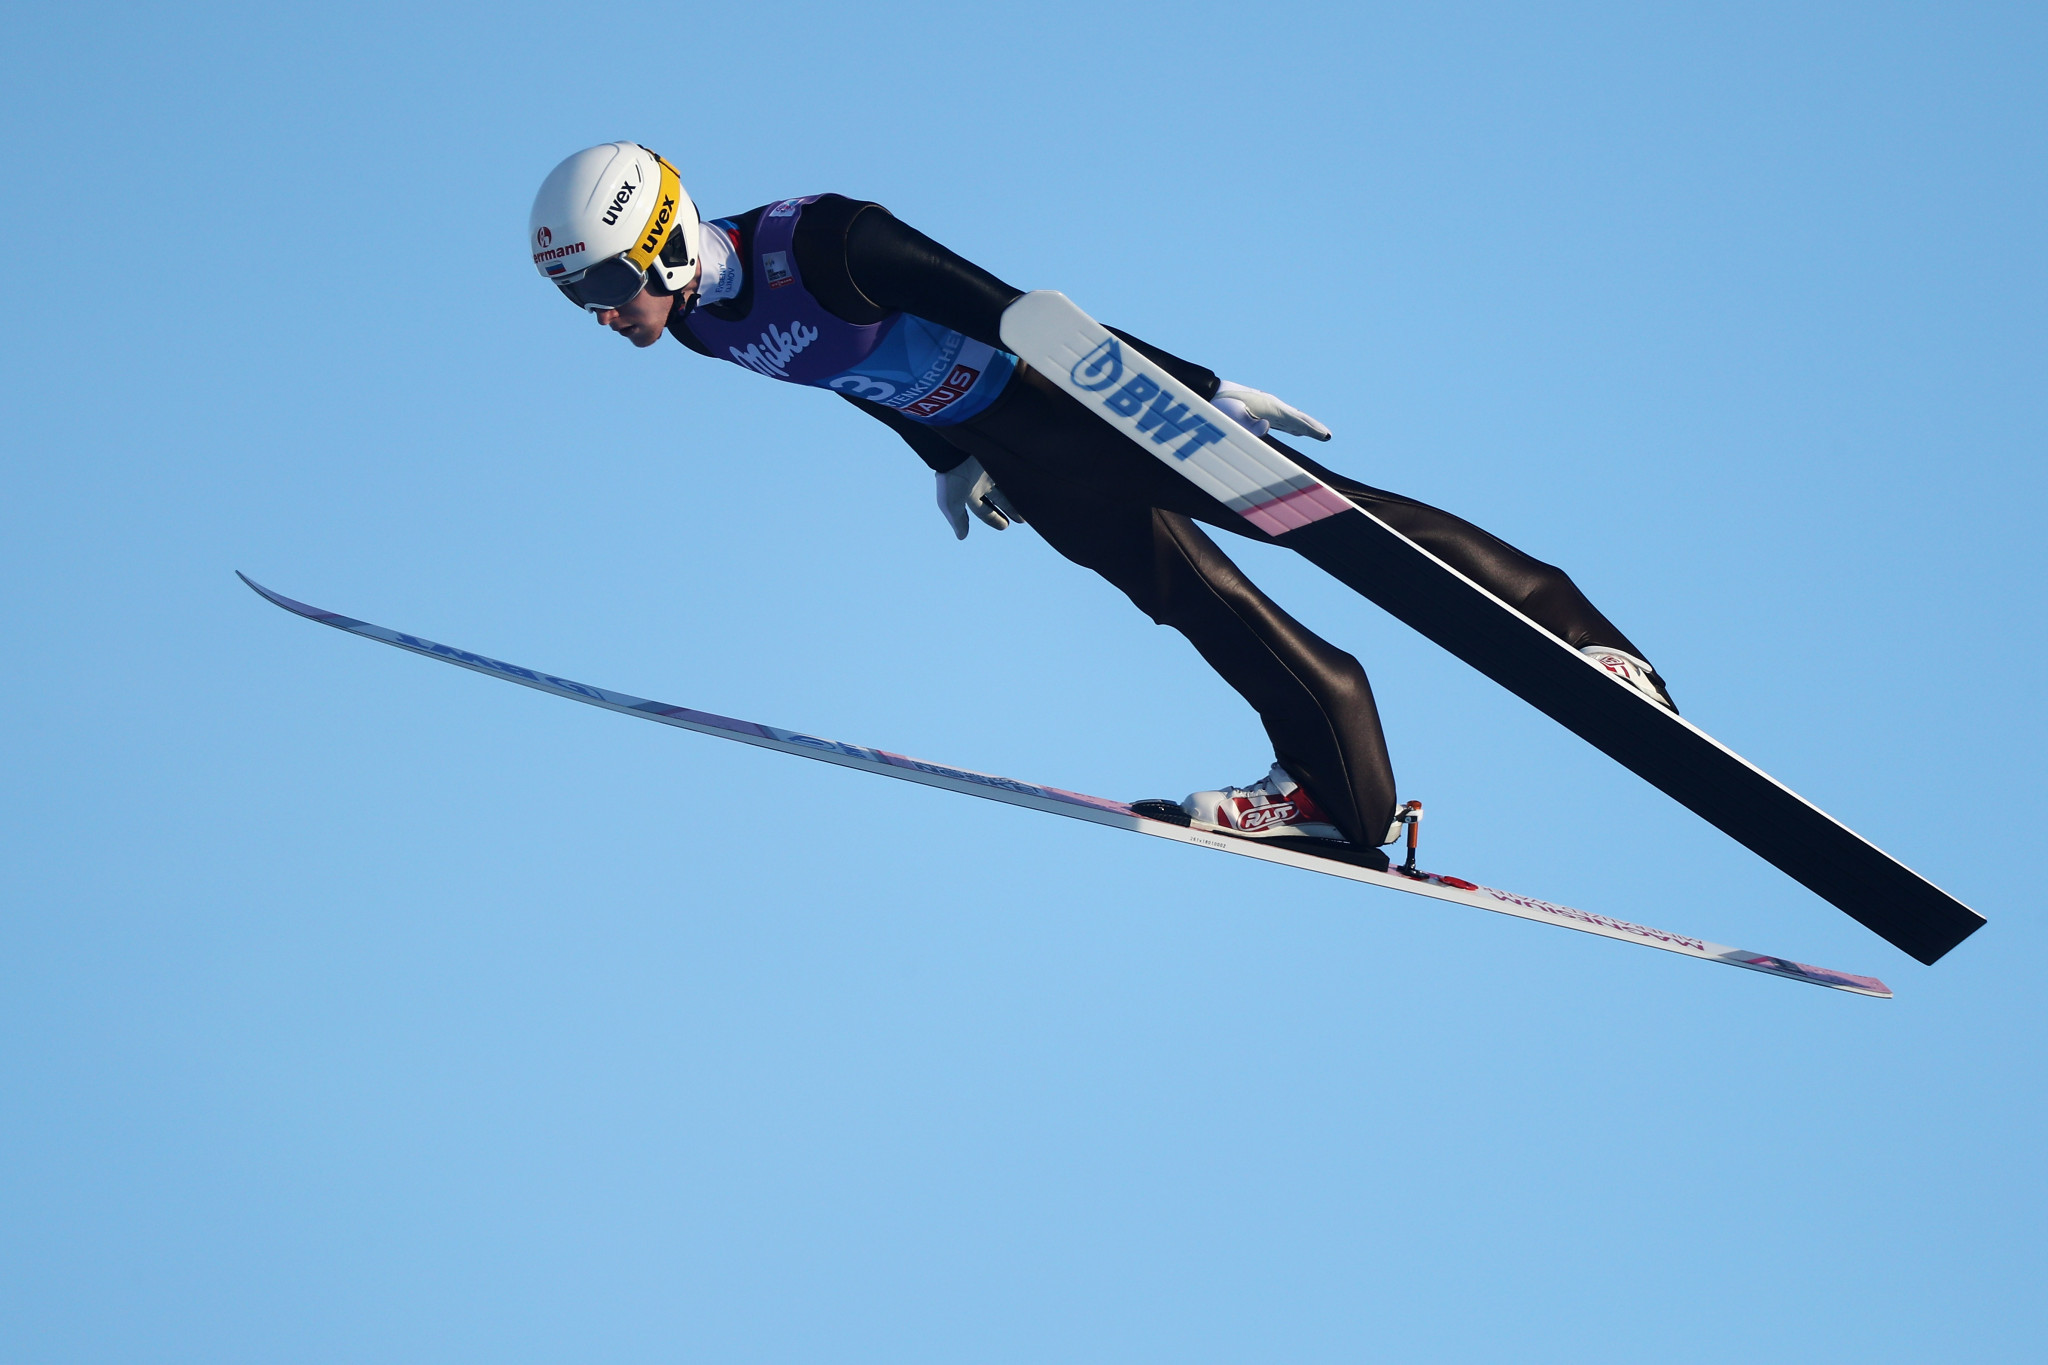 Klimov tops qualification at FIS Ski Jumping World Cup opener